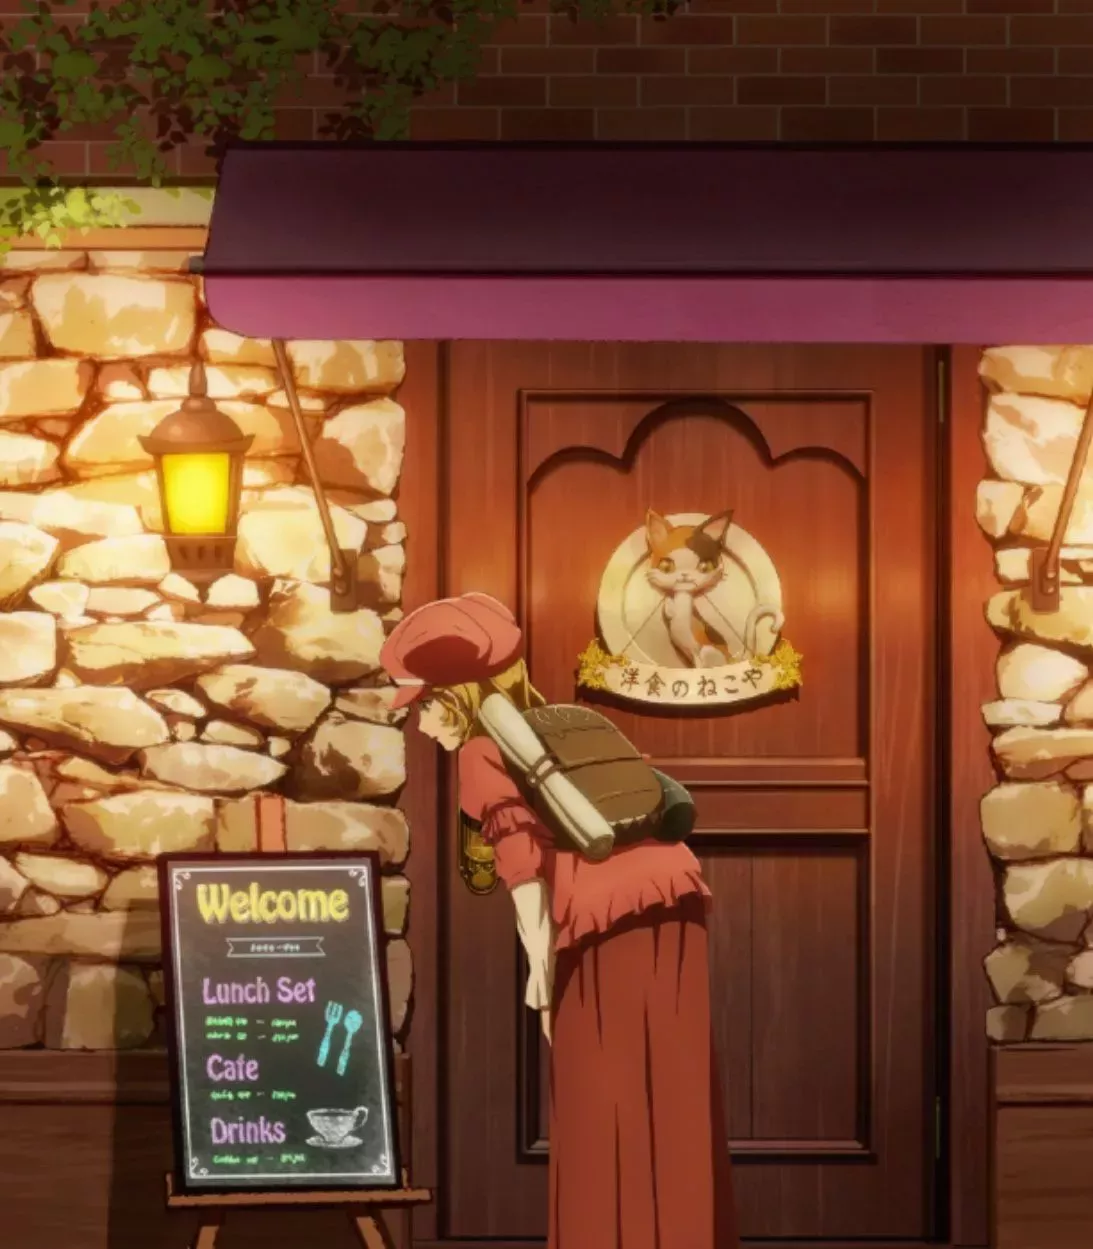 Aletta looking at the menu in Restaurant To Another World anime.